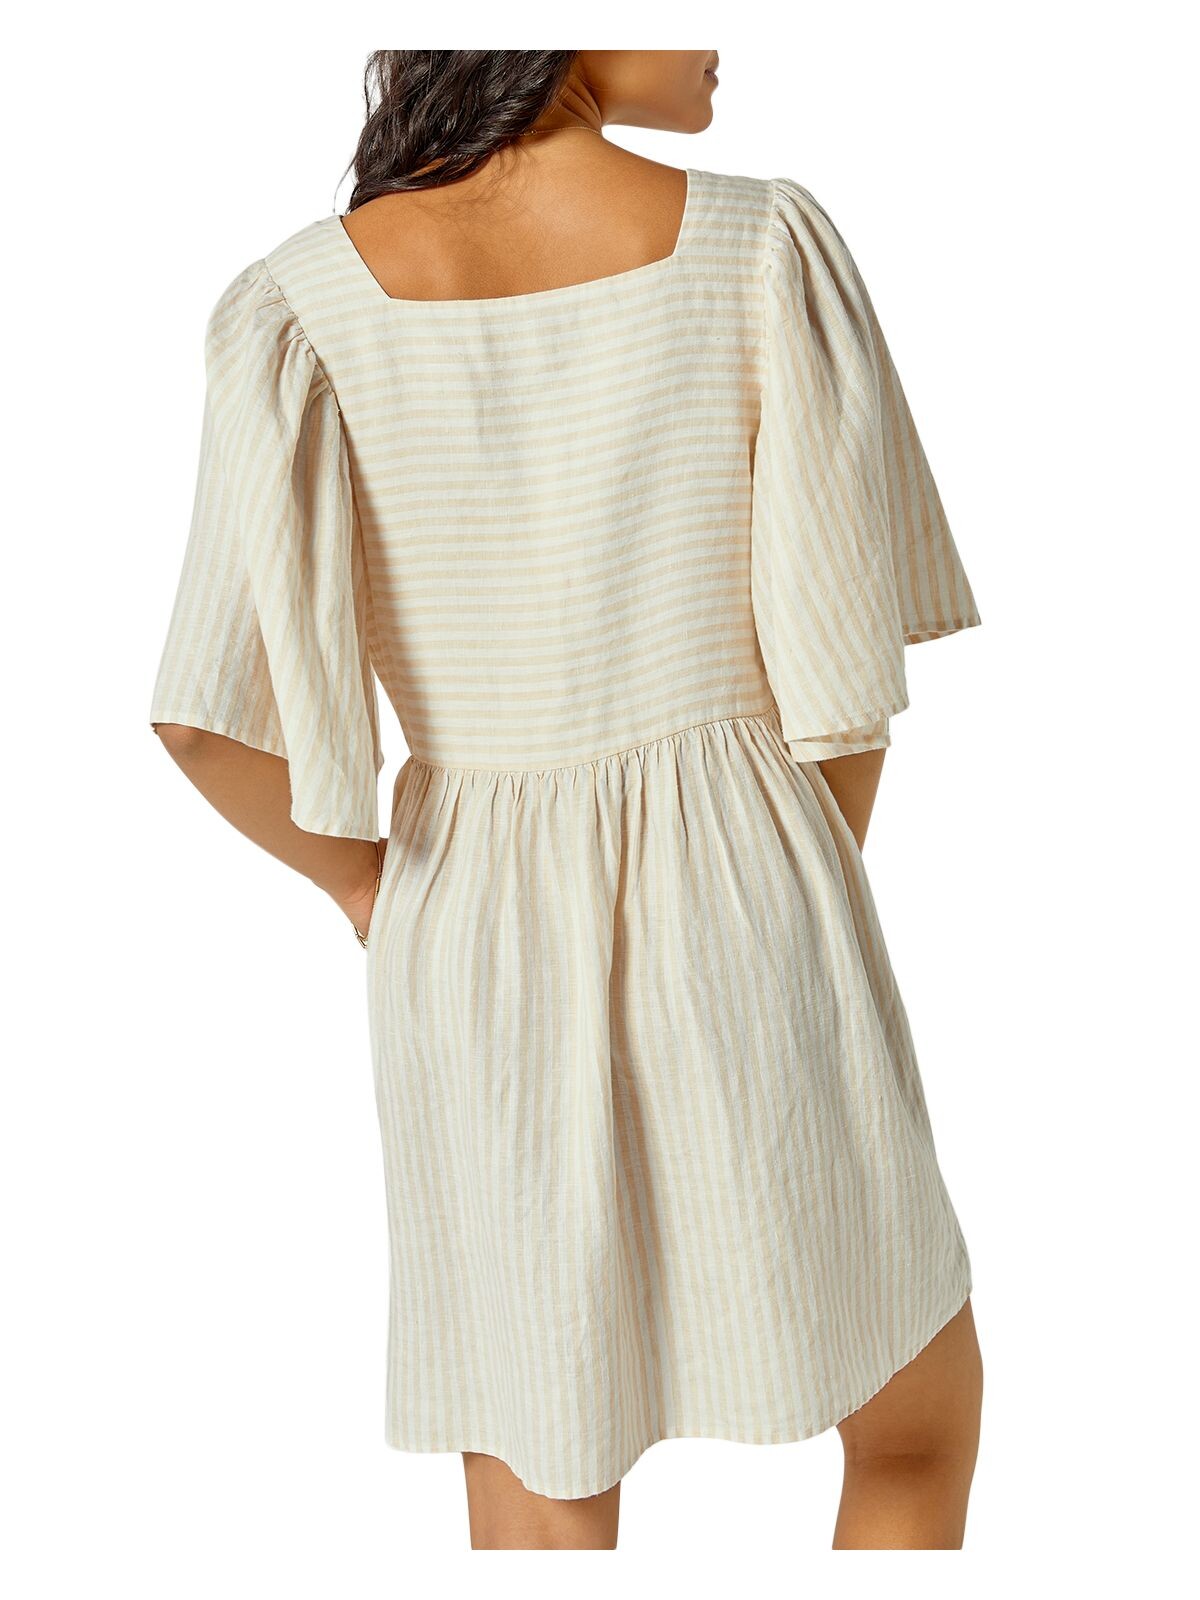 JOIE Womens White Striped Bell Sleeve Square Neck Above The Knee Party Shift Dress XS